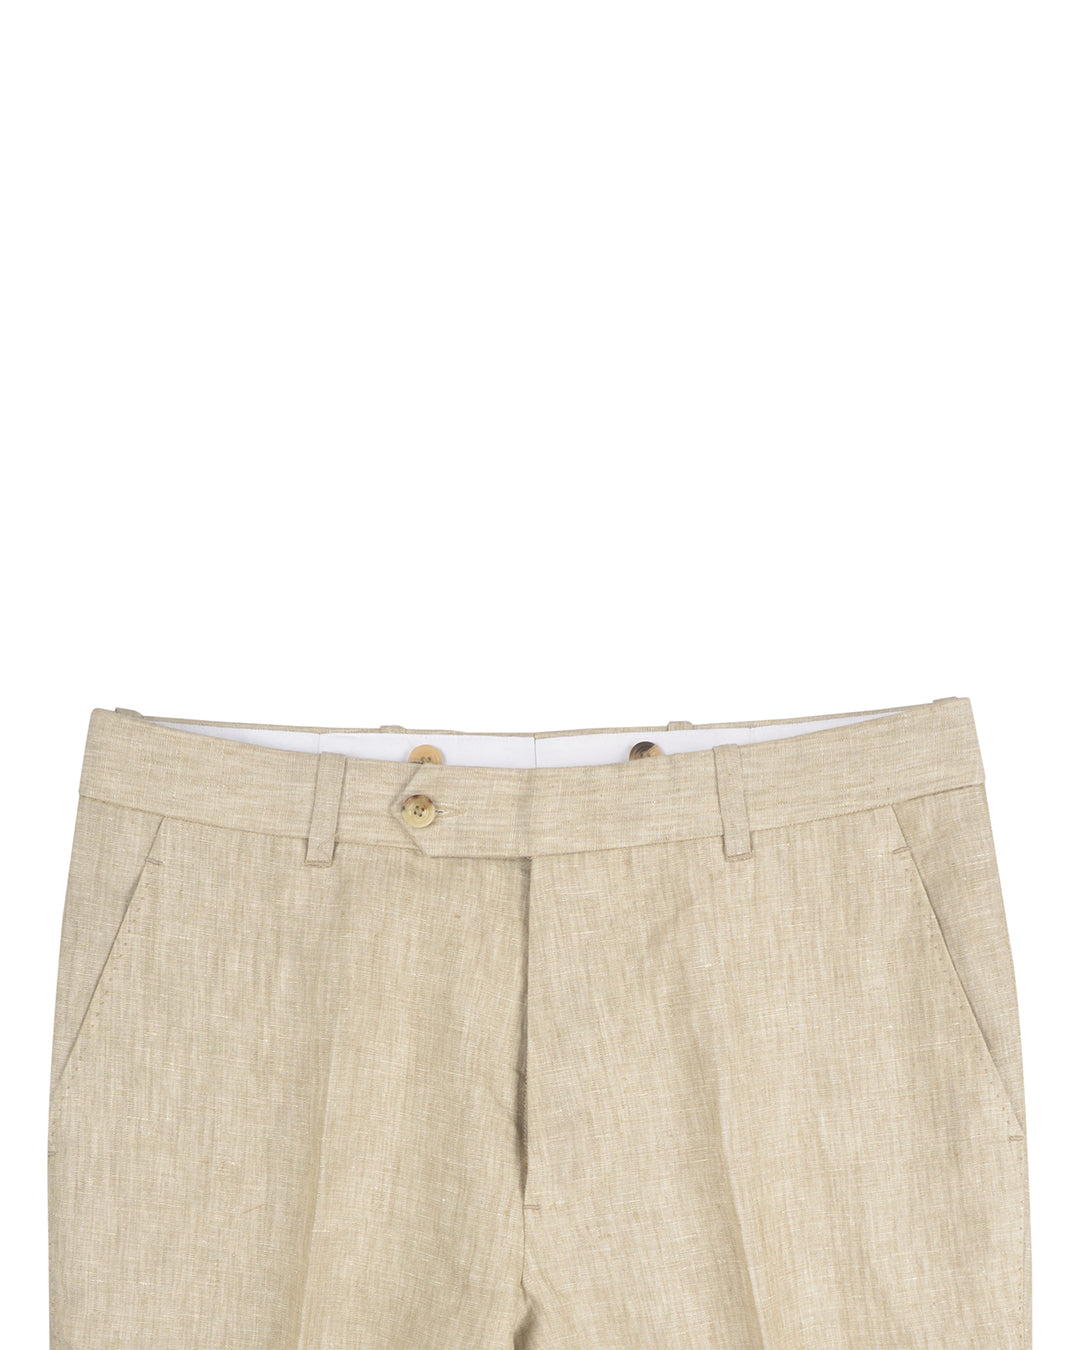 Front view of custom linen pants for men by Luxire in natural ecru